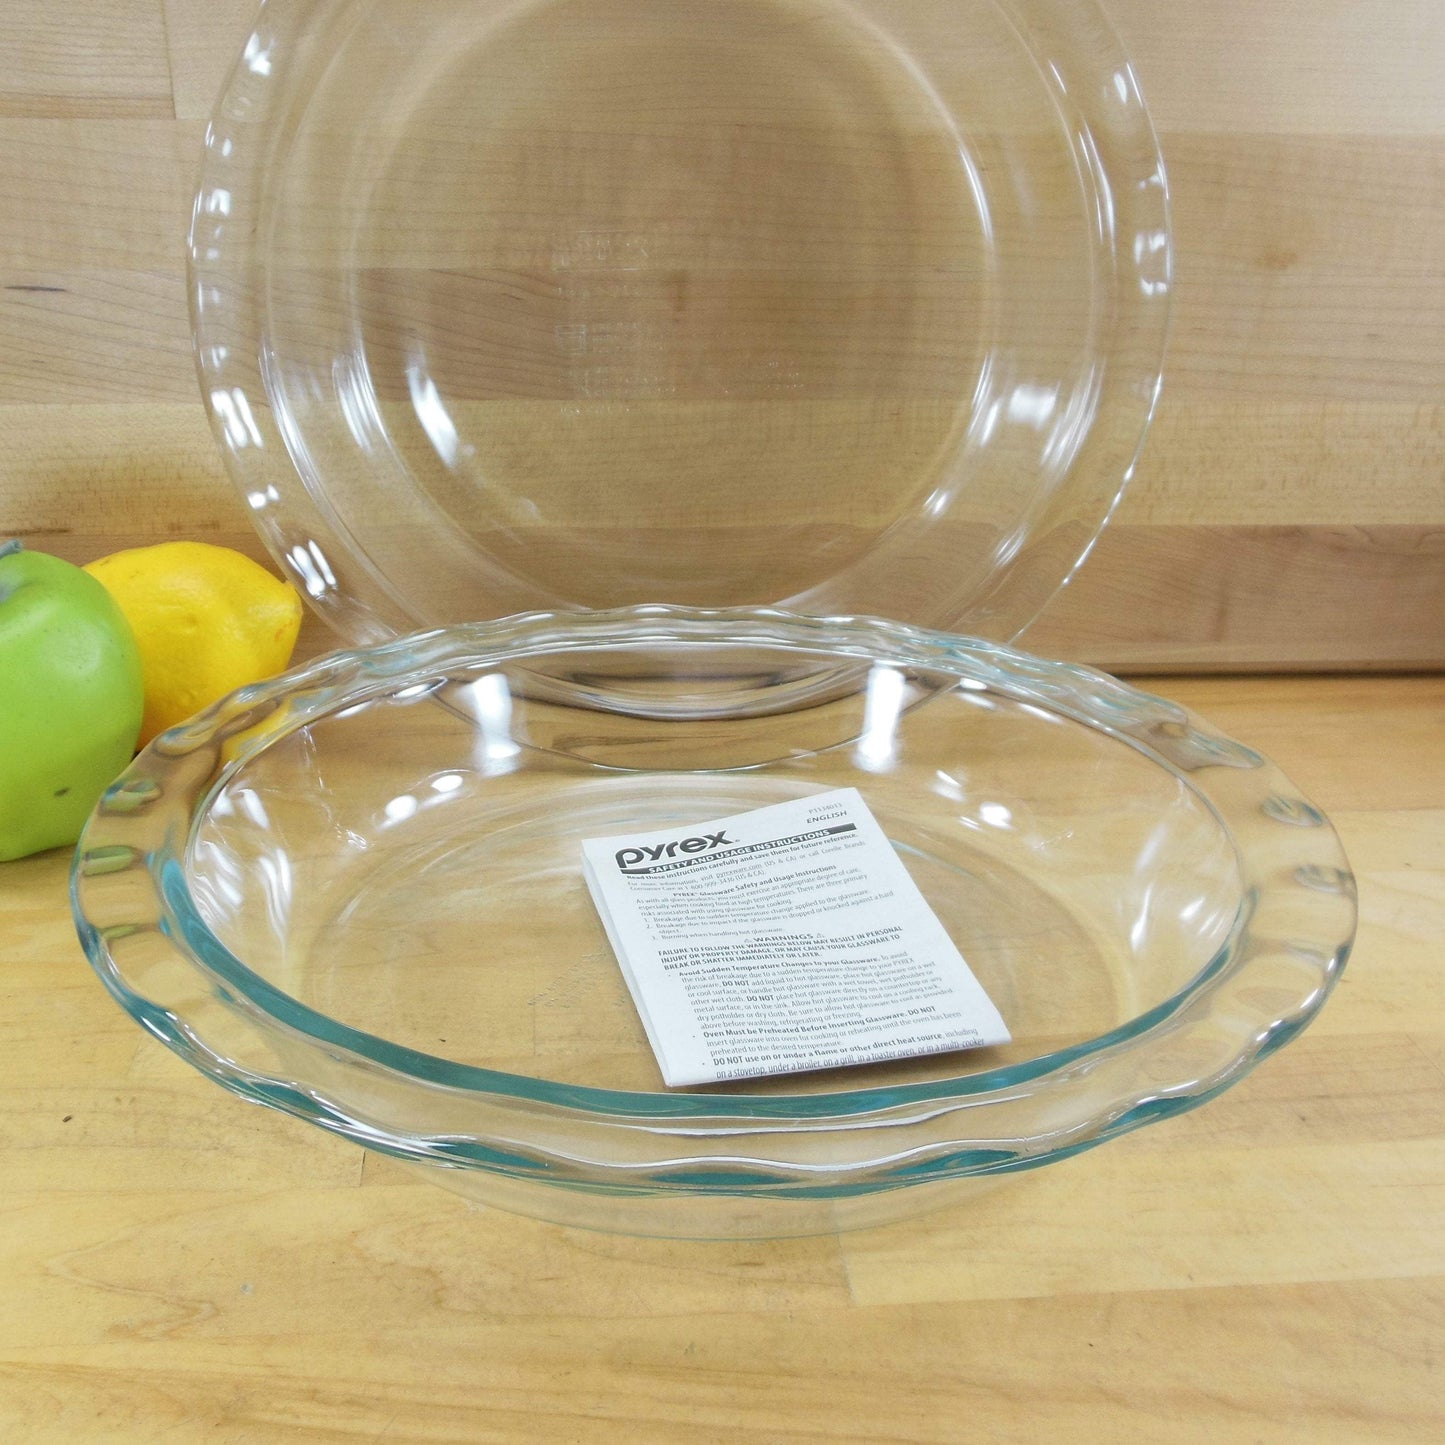 Pyrex USA Pair Blue Tint Glass Scalloped 9.5" Pie Plate Dishes C209 Unused